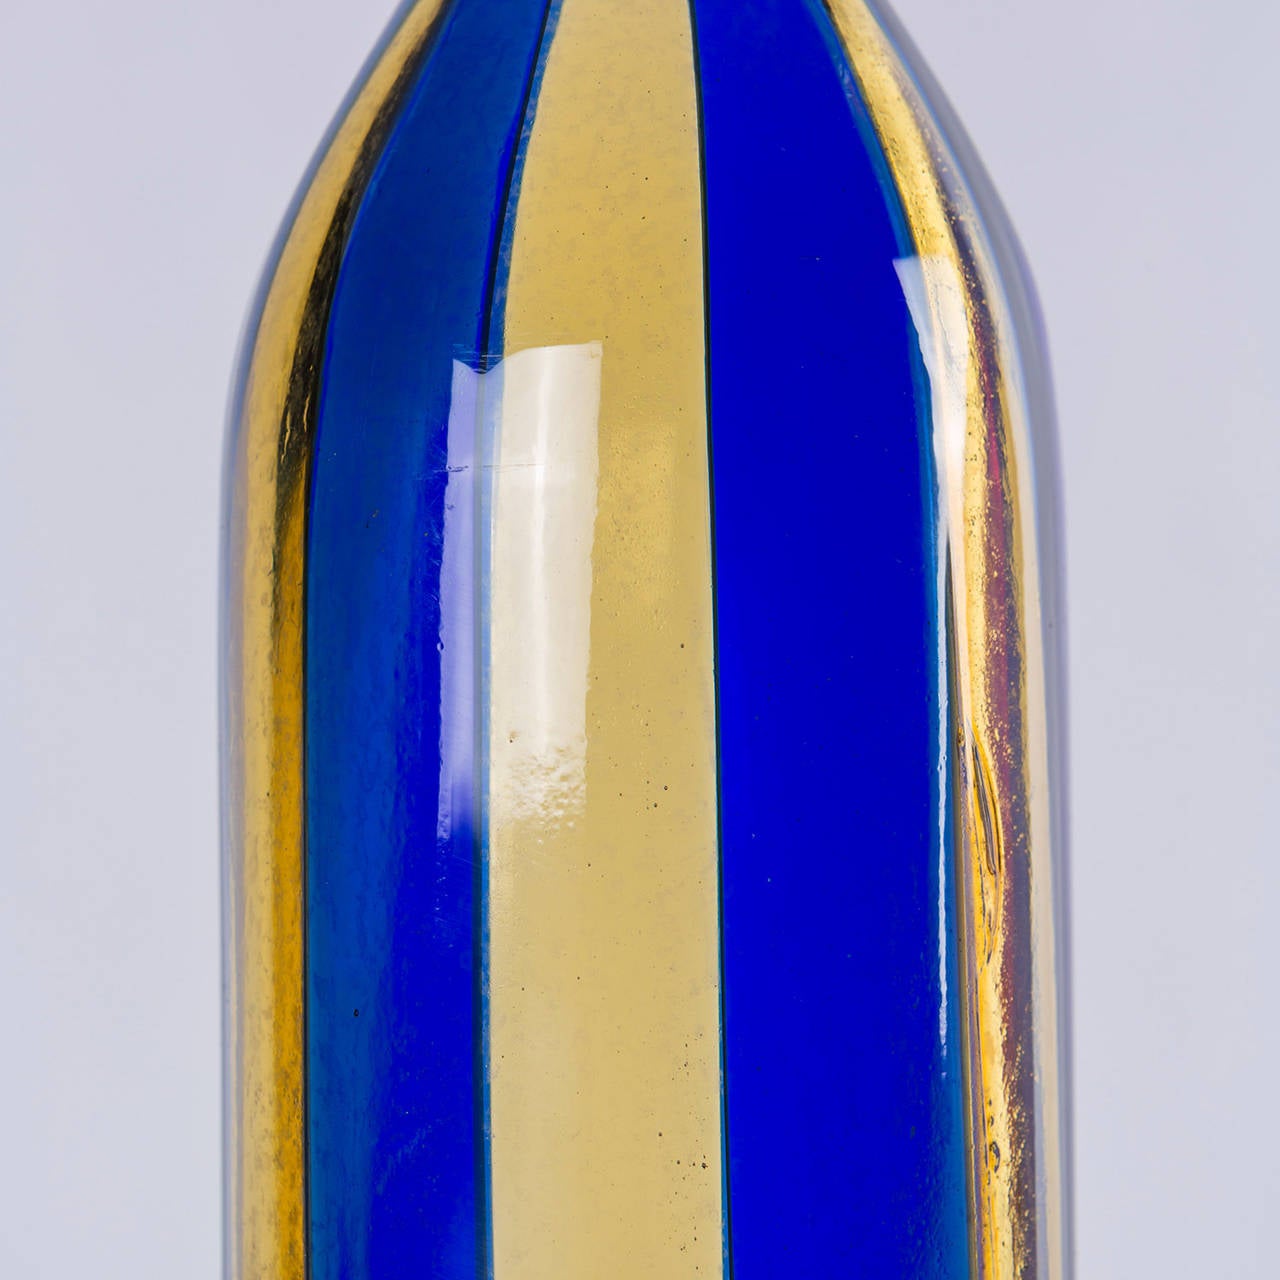 Mid-20th Century Rare Set of Two Murano Glass Bottles by Fulvio Bianconi and Paolo Venini, 1950s For Sale